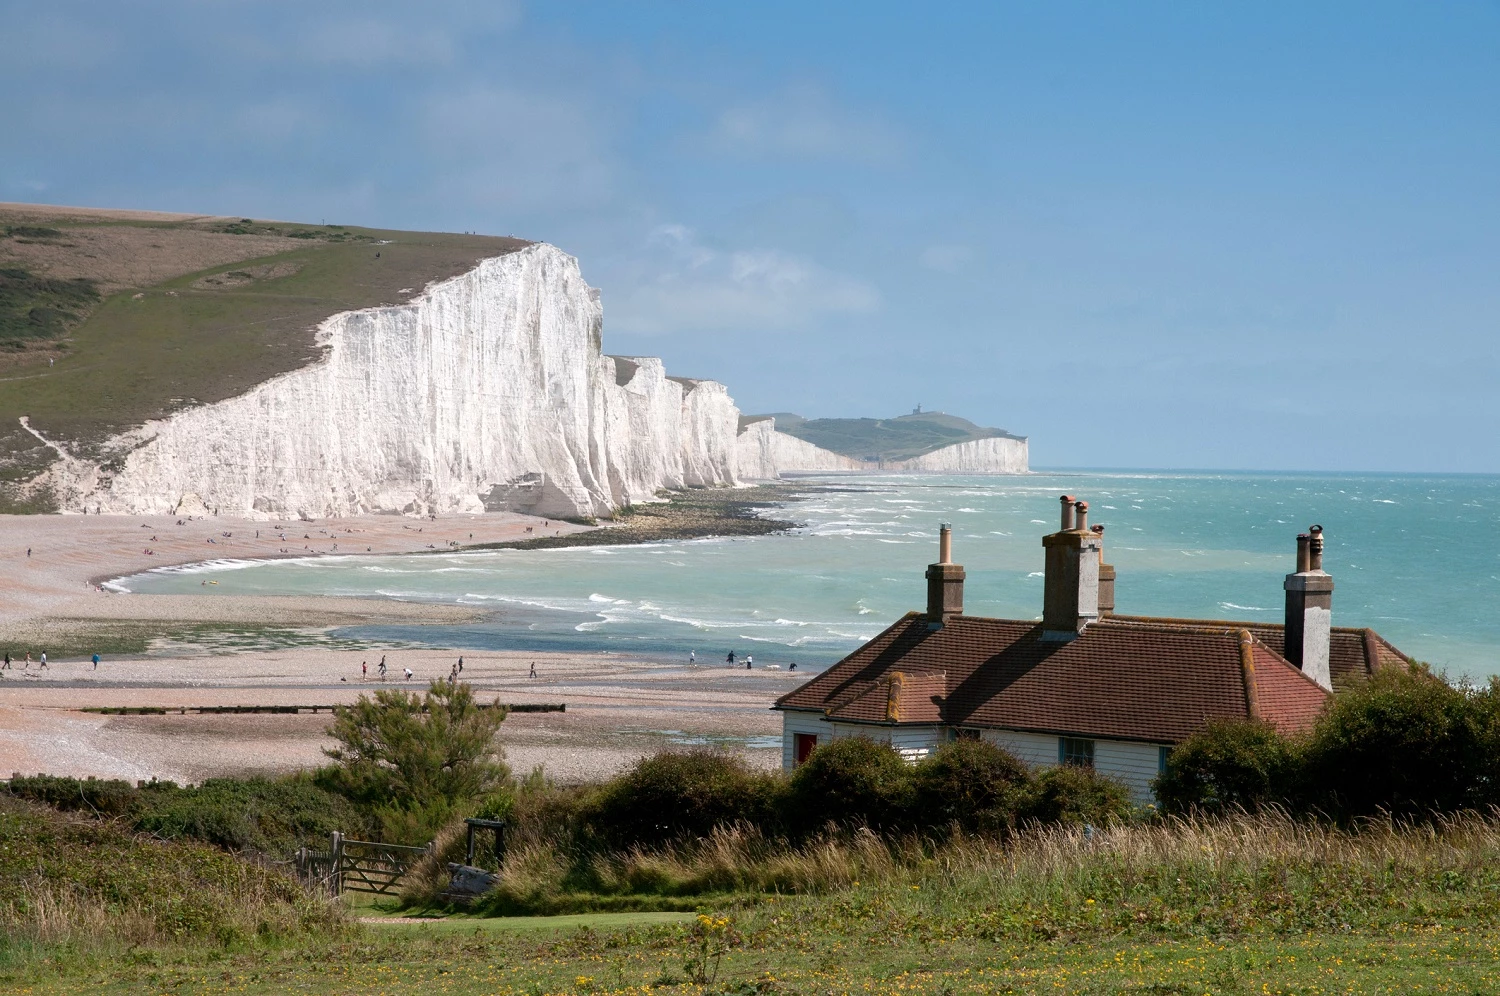 Holiday home on the sea-front with white cliffs behind